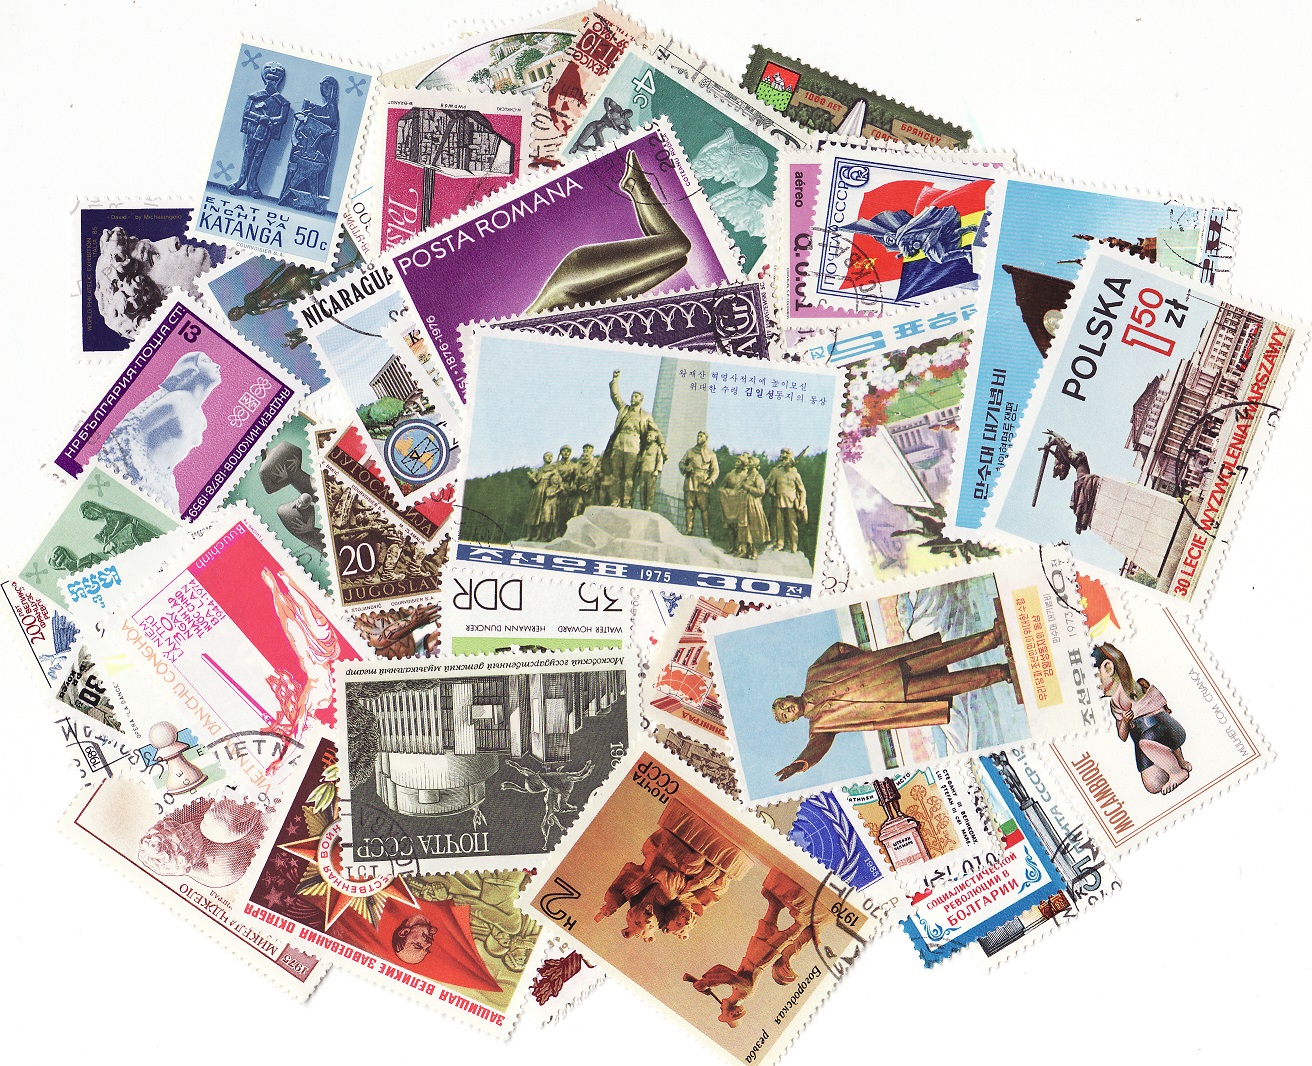   Statues on Stamps, Topical Stamp Packet, 100 different stamps